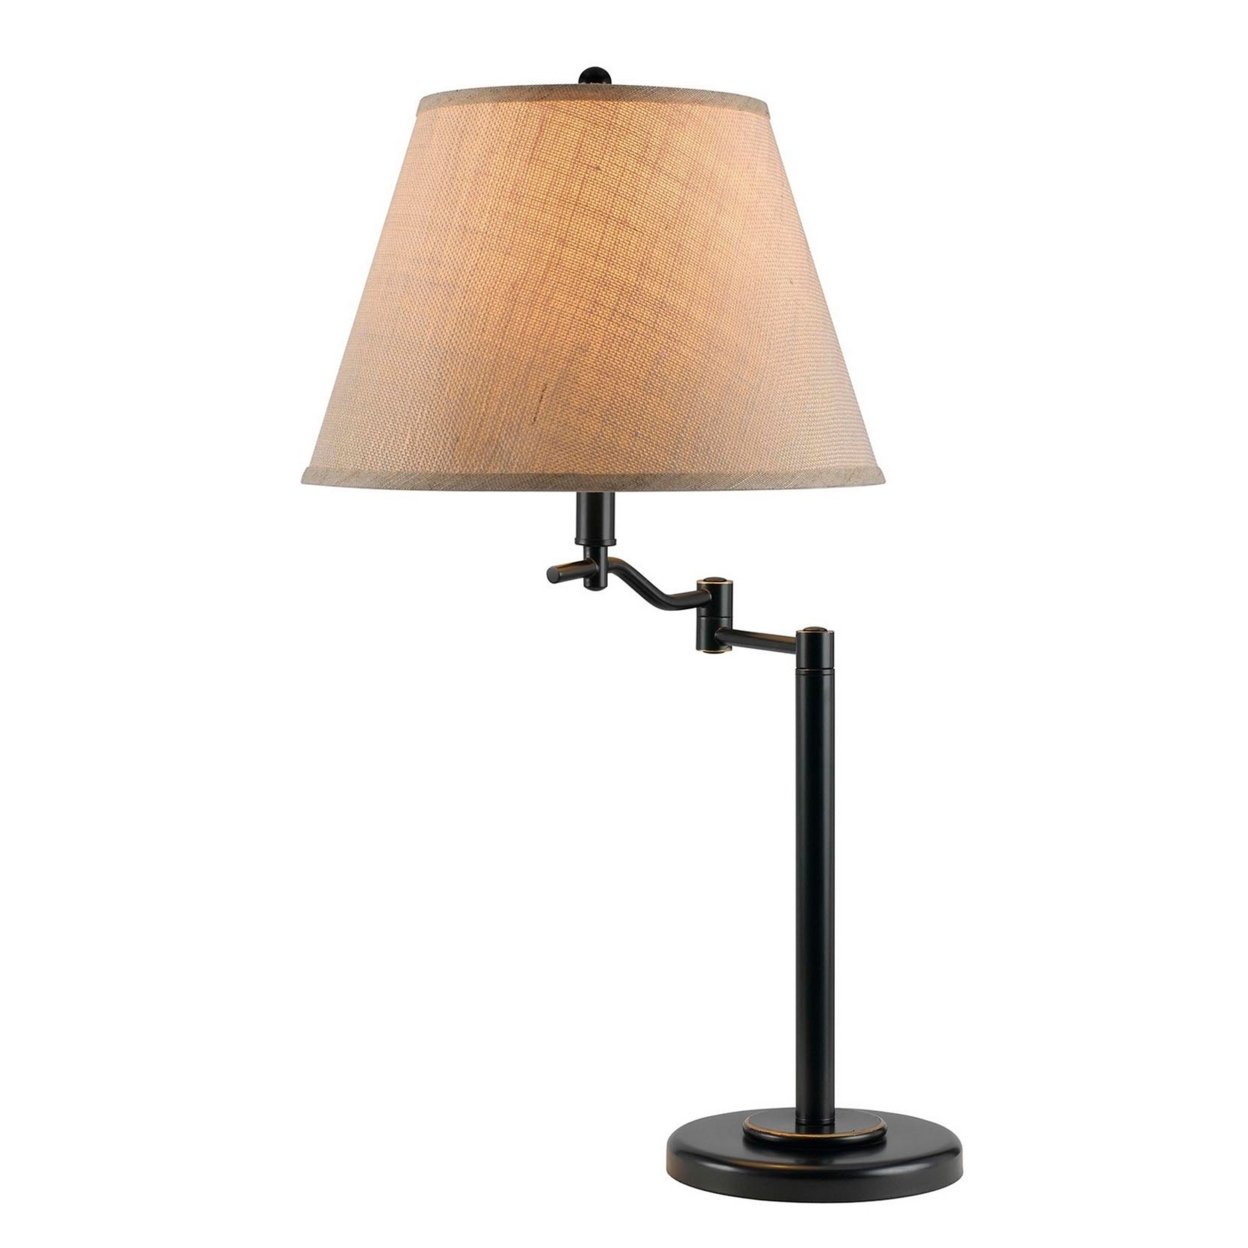 3 Way Metal Body Table Lamp With Swing Arm And Conical Fabric Shade, Black- Saltoro Sherpi